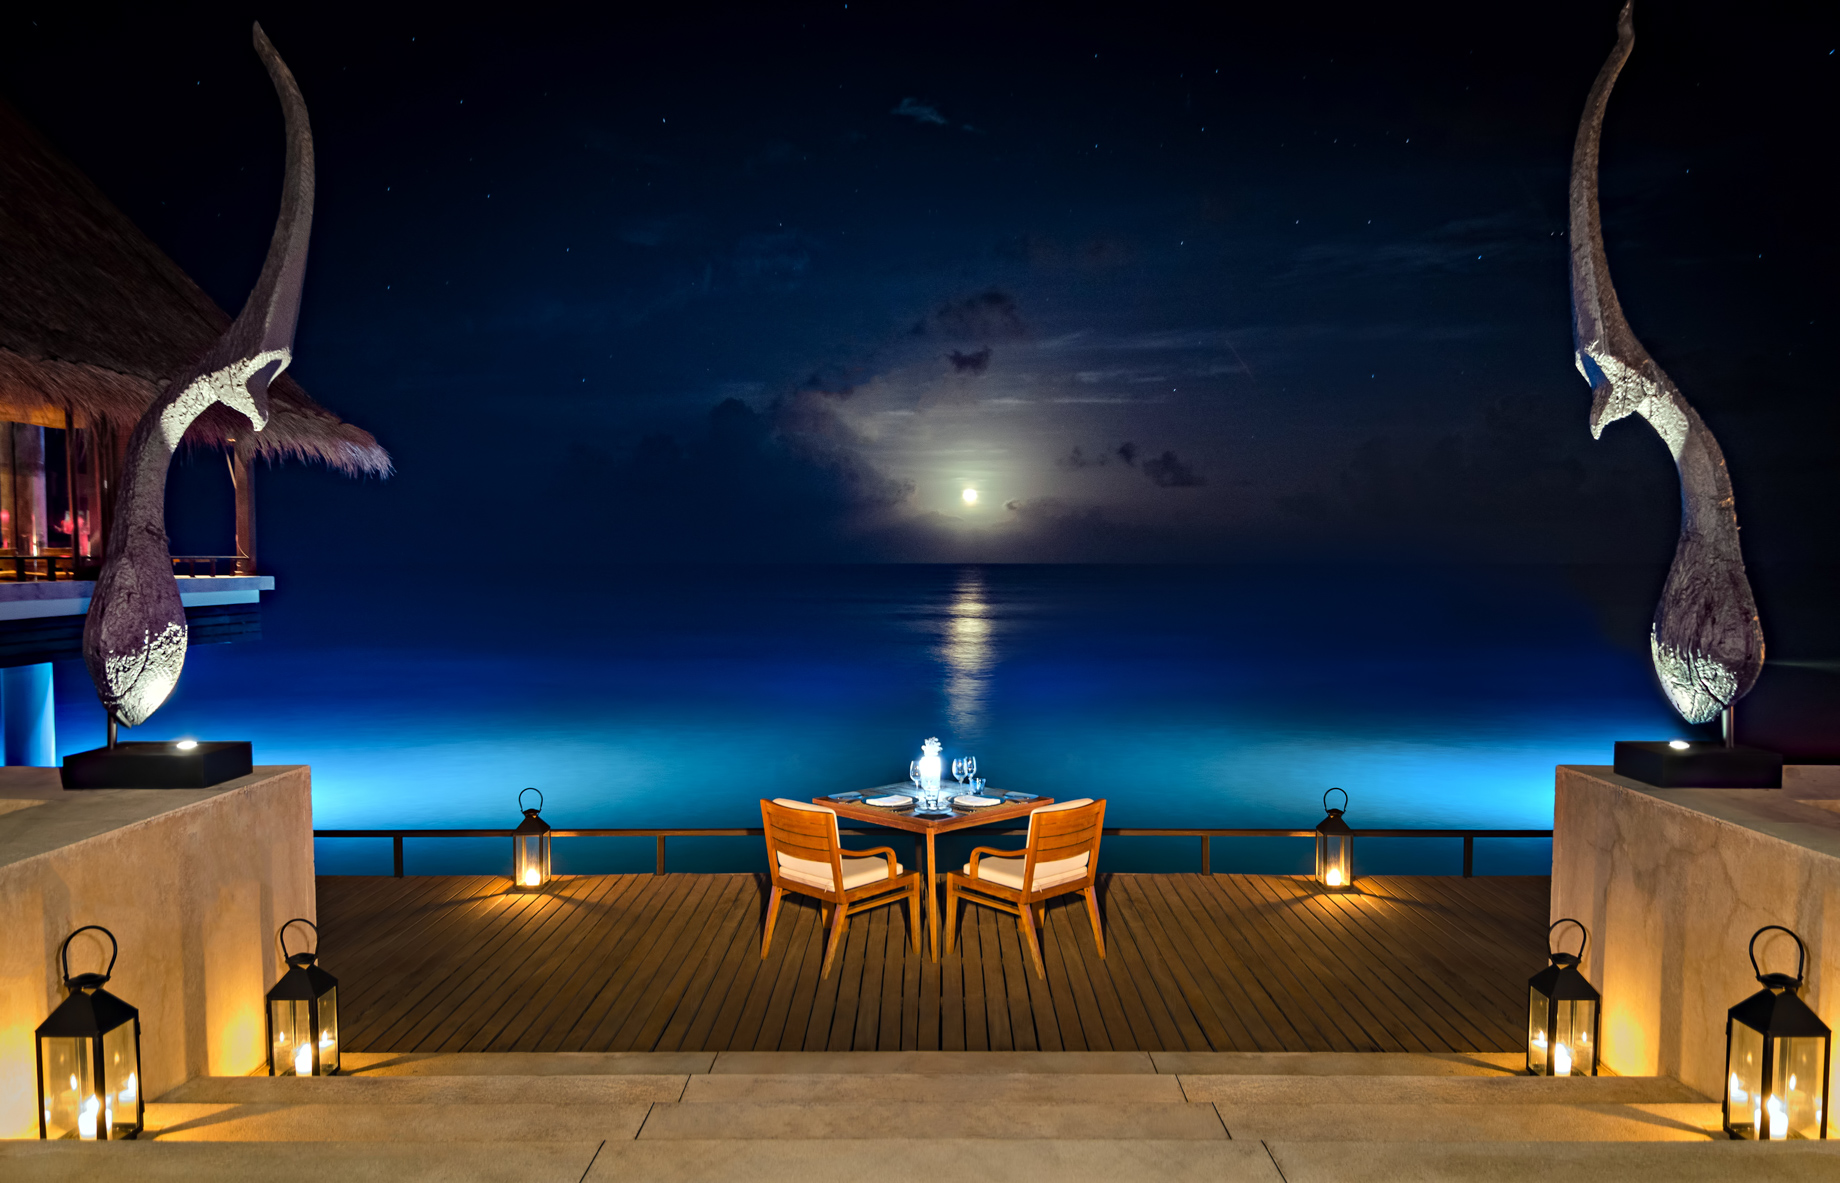 One&Only Reethi Rah Resort – North Male Atoll, Maldives – Aqua Restaurant Overwater Terrace Oceanview Night